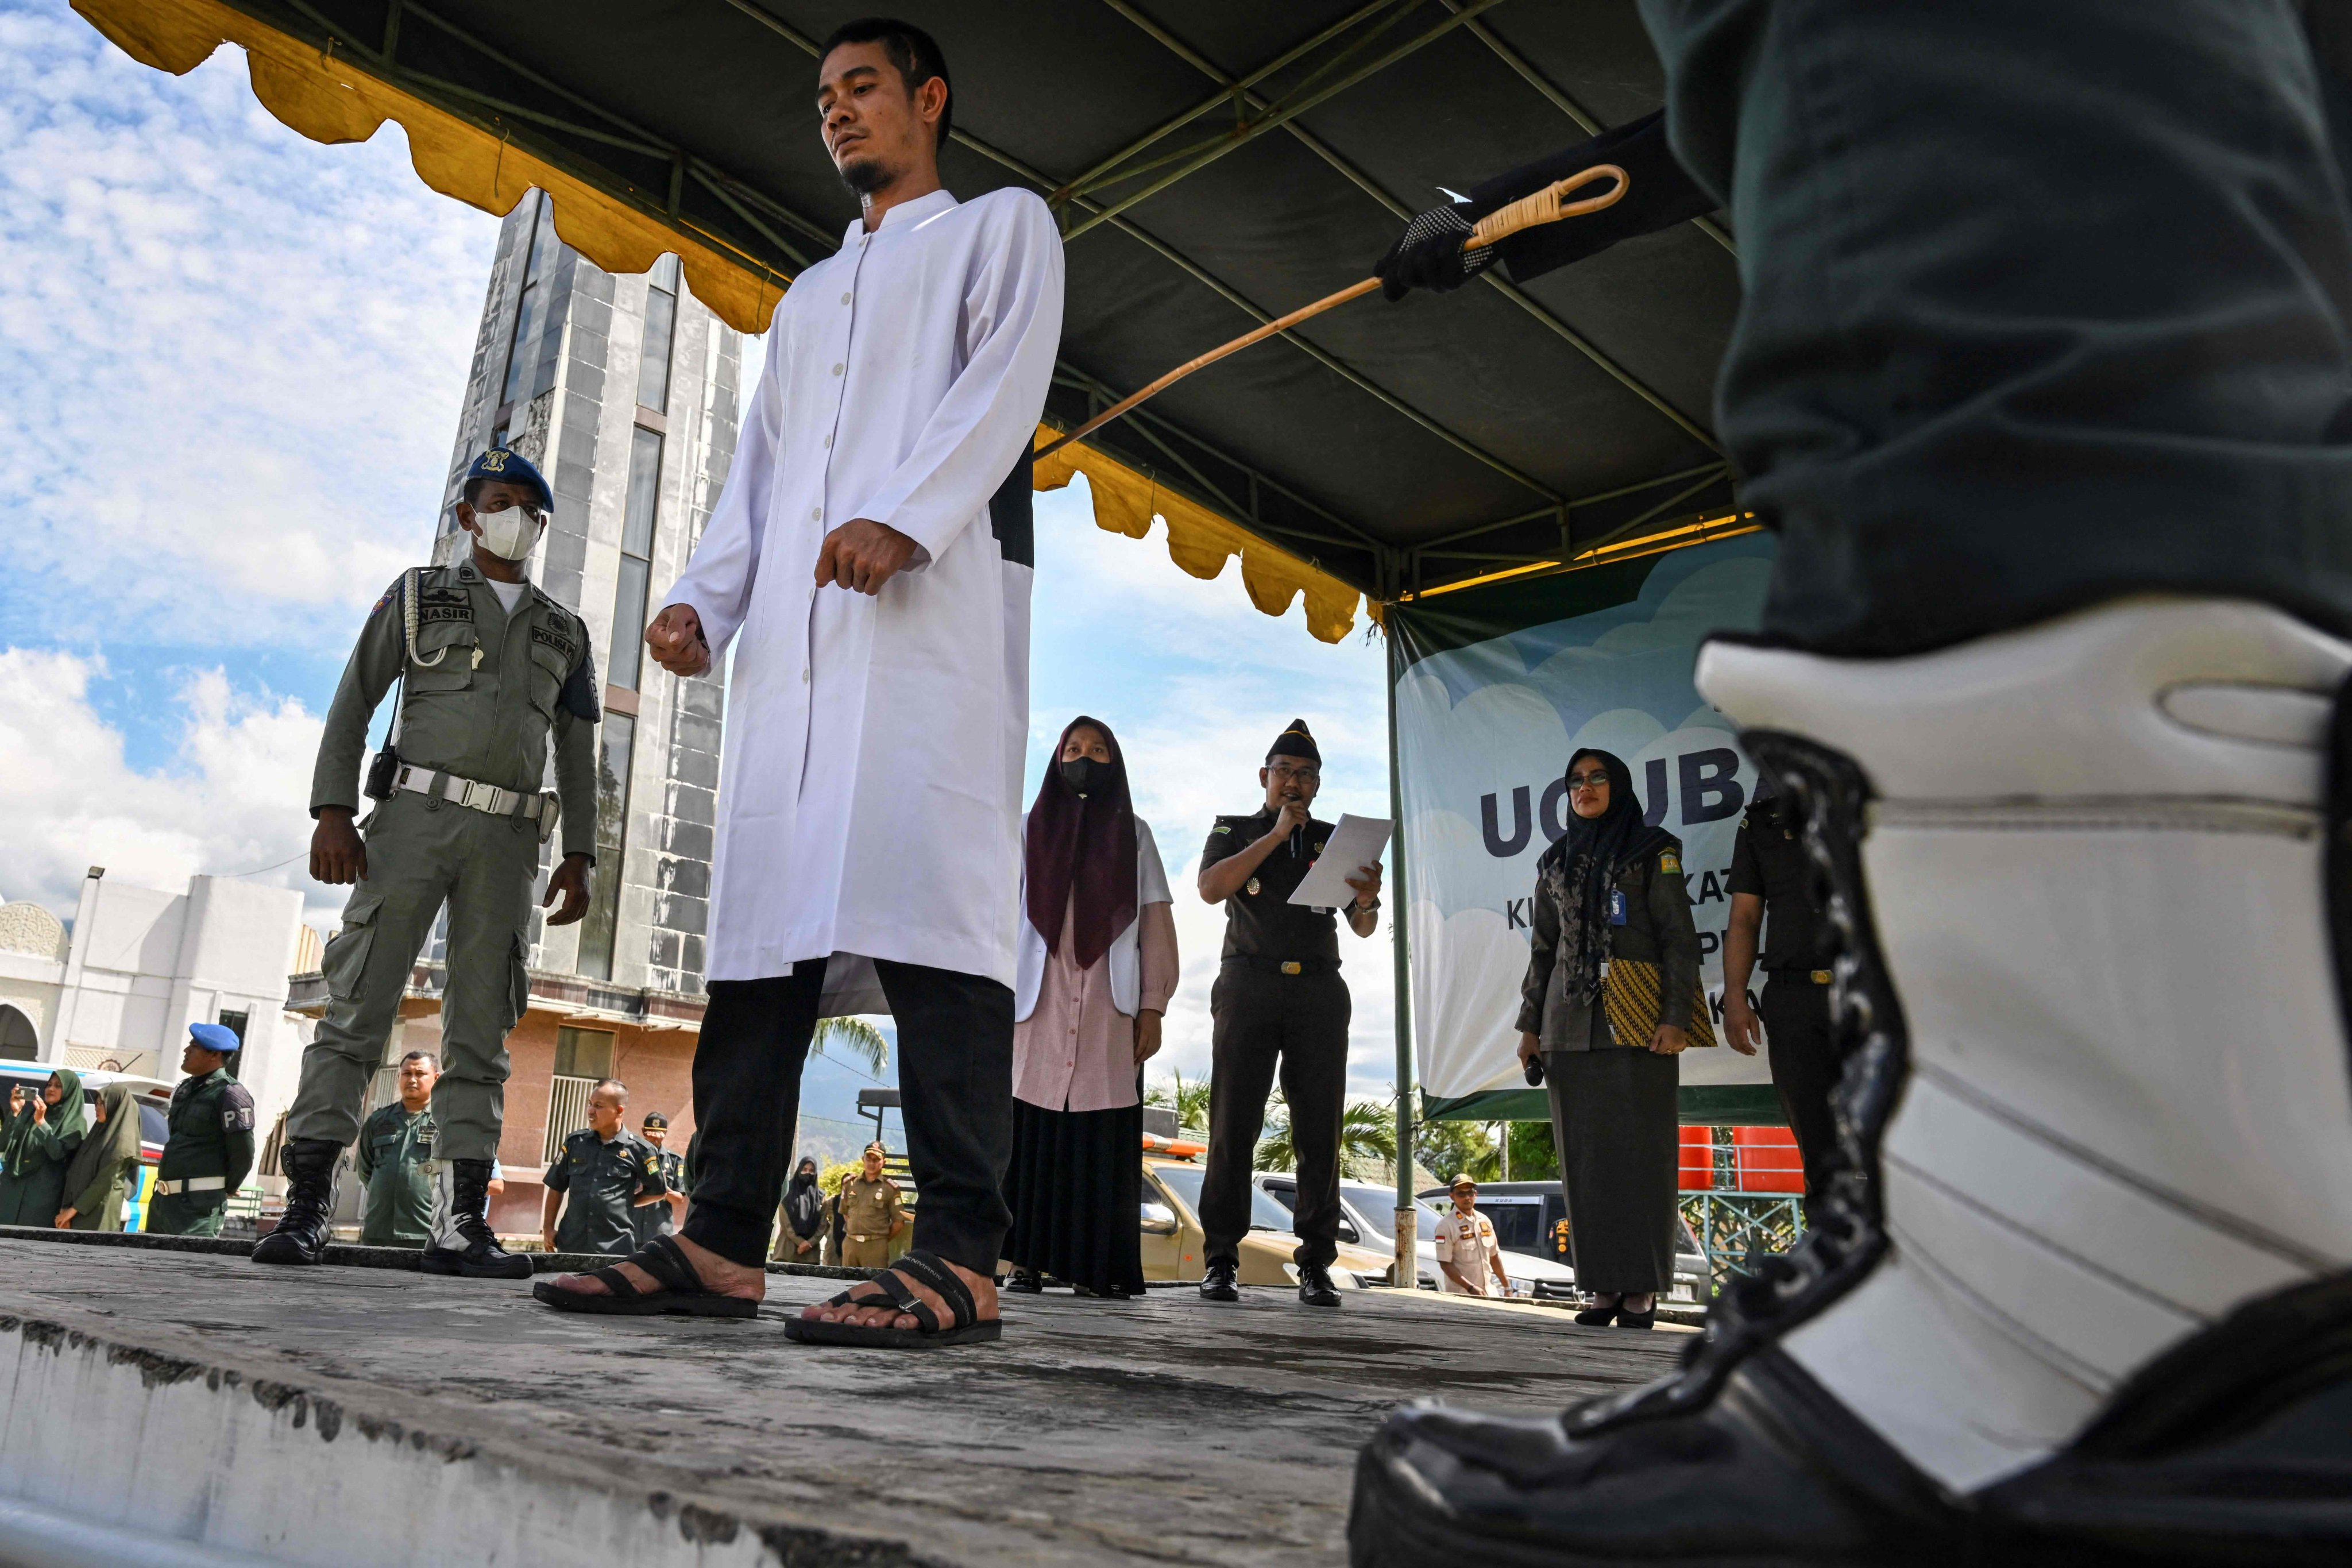 Indonesia’s religious police canes a man for using online gambling, in front of Al Munawwarah mosque in Jantho, Aceh province. Gambling is illegal in Indonesia. Photo: AFP